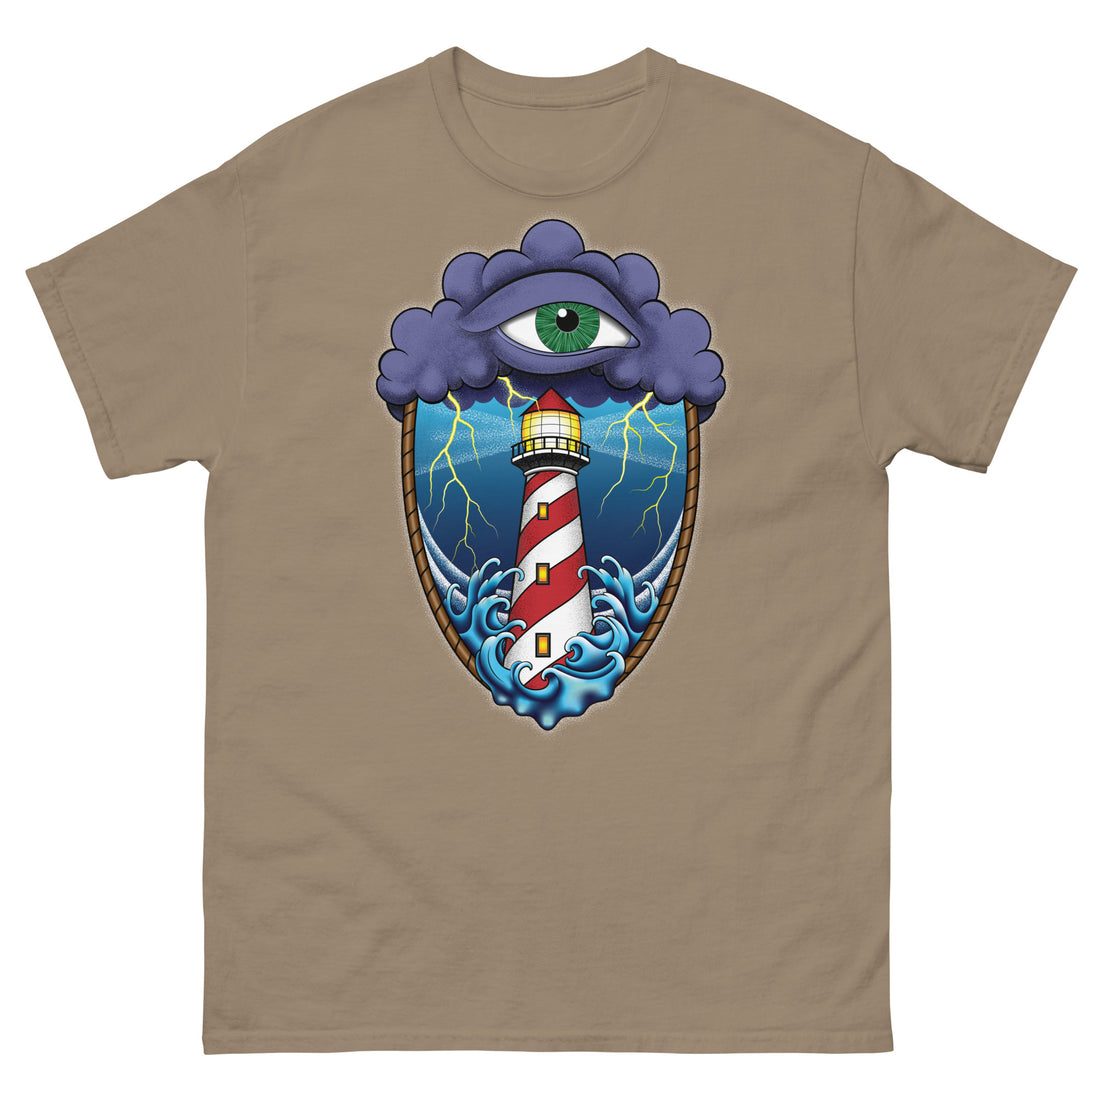 A brown t-shirt with an old school eye of the storm tattoo design of large dark purple storm clouds at the top of the design with a green eye in the middle of the clouds.  Below the clouds is an oval shape with brown rope. Inside the rope are stormy seas and a lighthouse with lightning striking in the background.  At the bottom of the design, some of the waves are spilling out of the rope barrier. The sky and seas are hues of blue; the lighthouse is white and red striped like a barber pole.